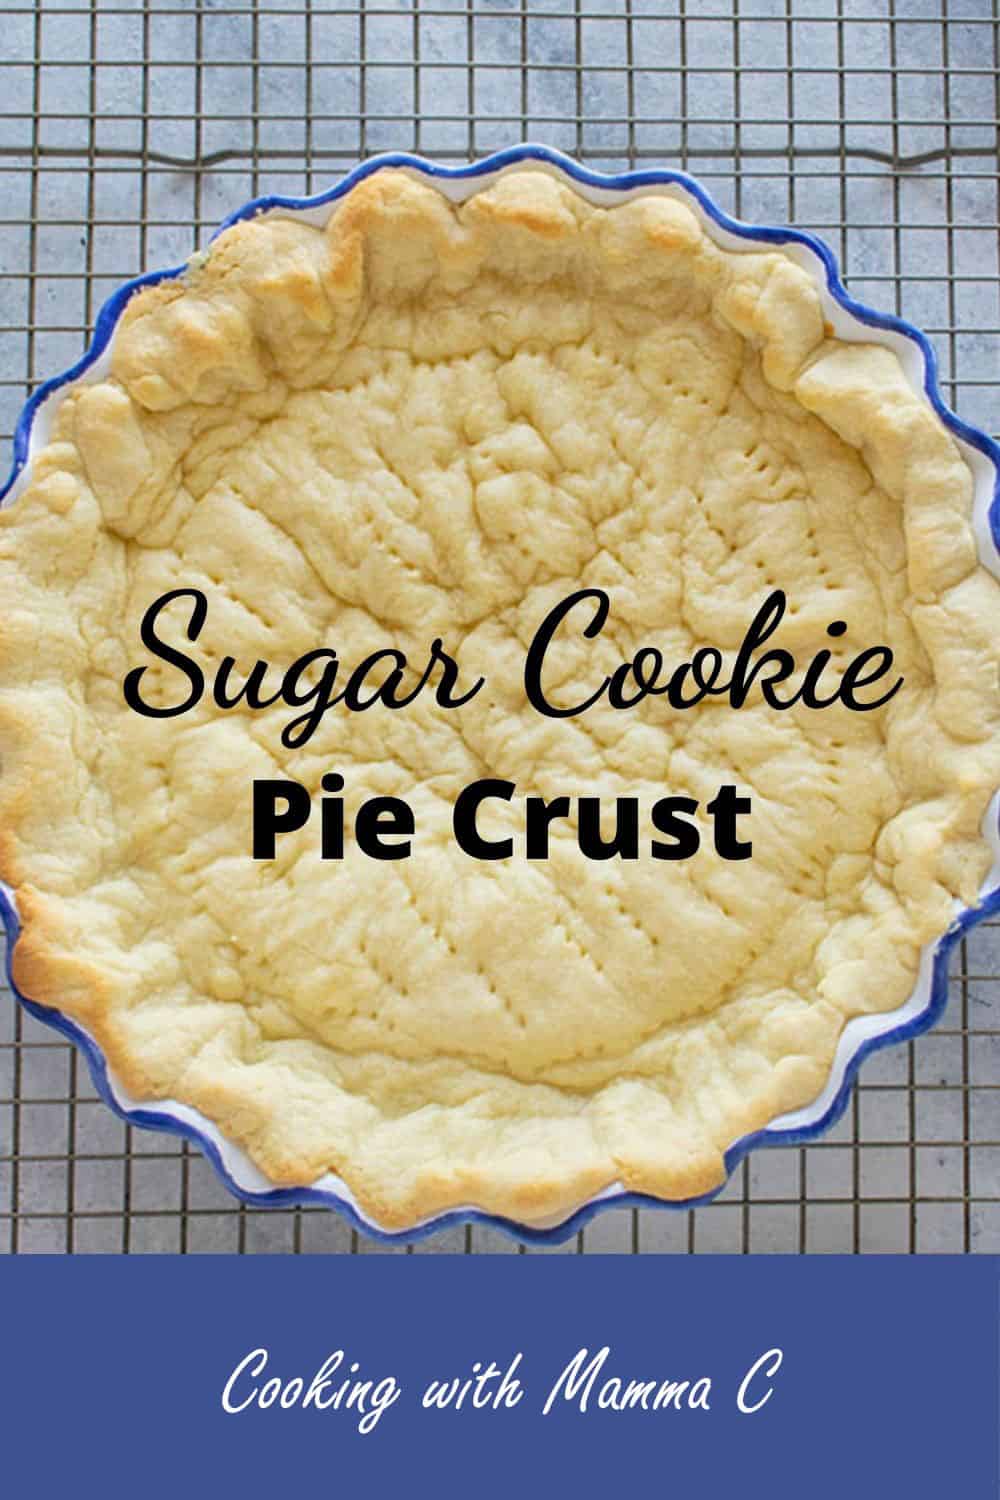 Sugar Cookie Pie Crust - Cooking with Mamma C